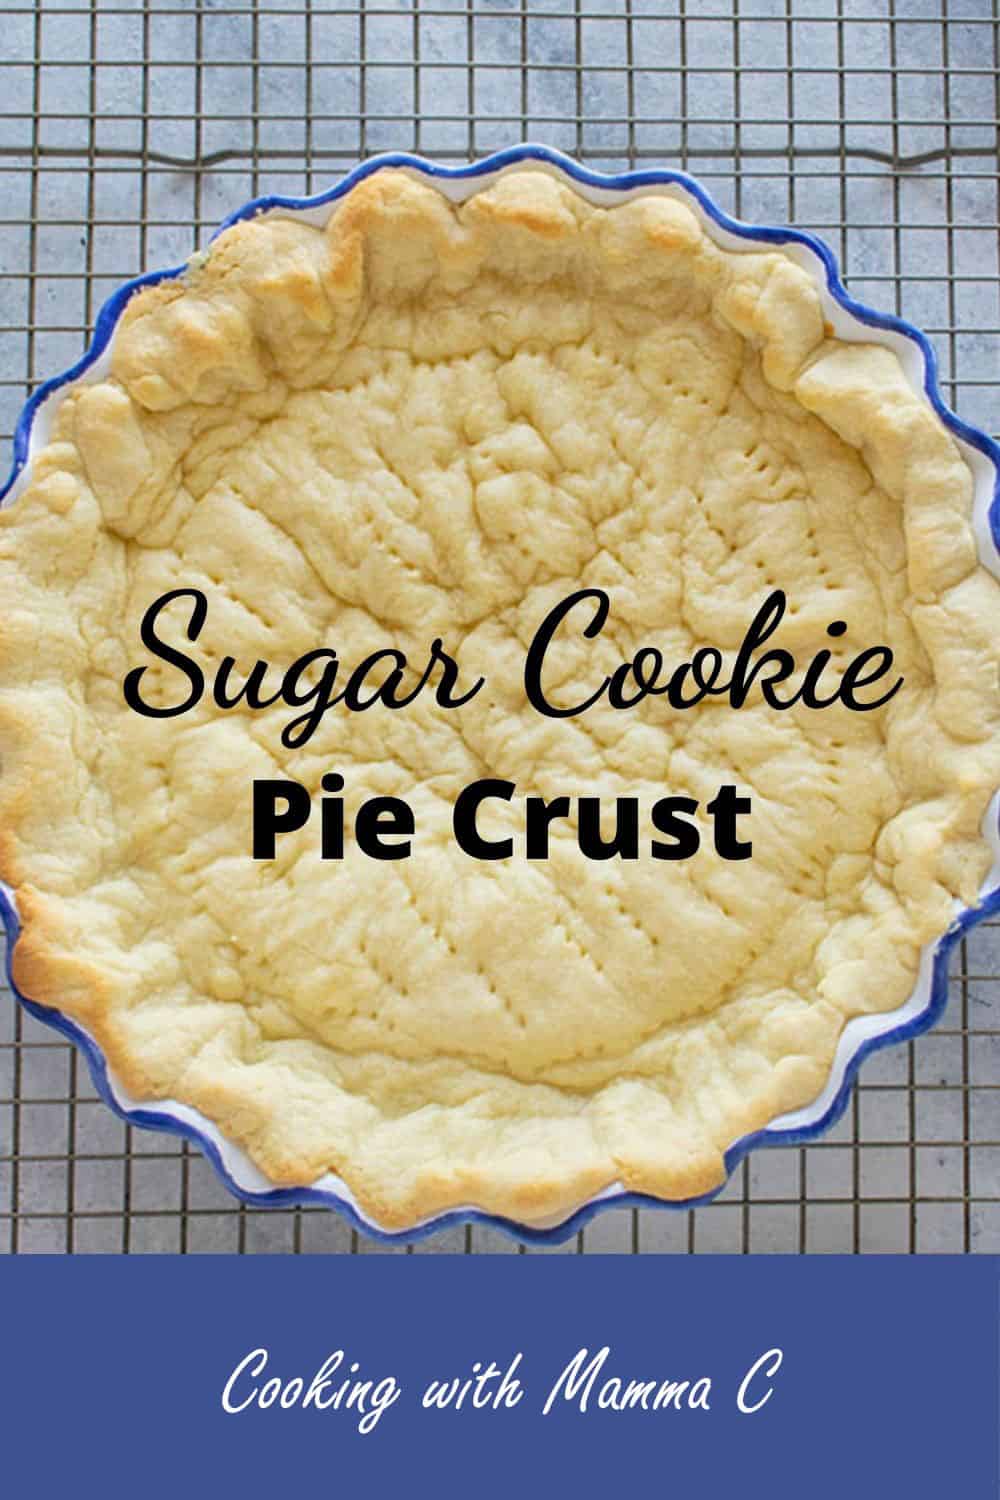 Sugar Cookie Pie Crust - Cooking with Mamma C